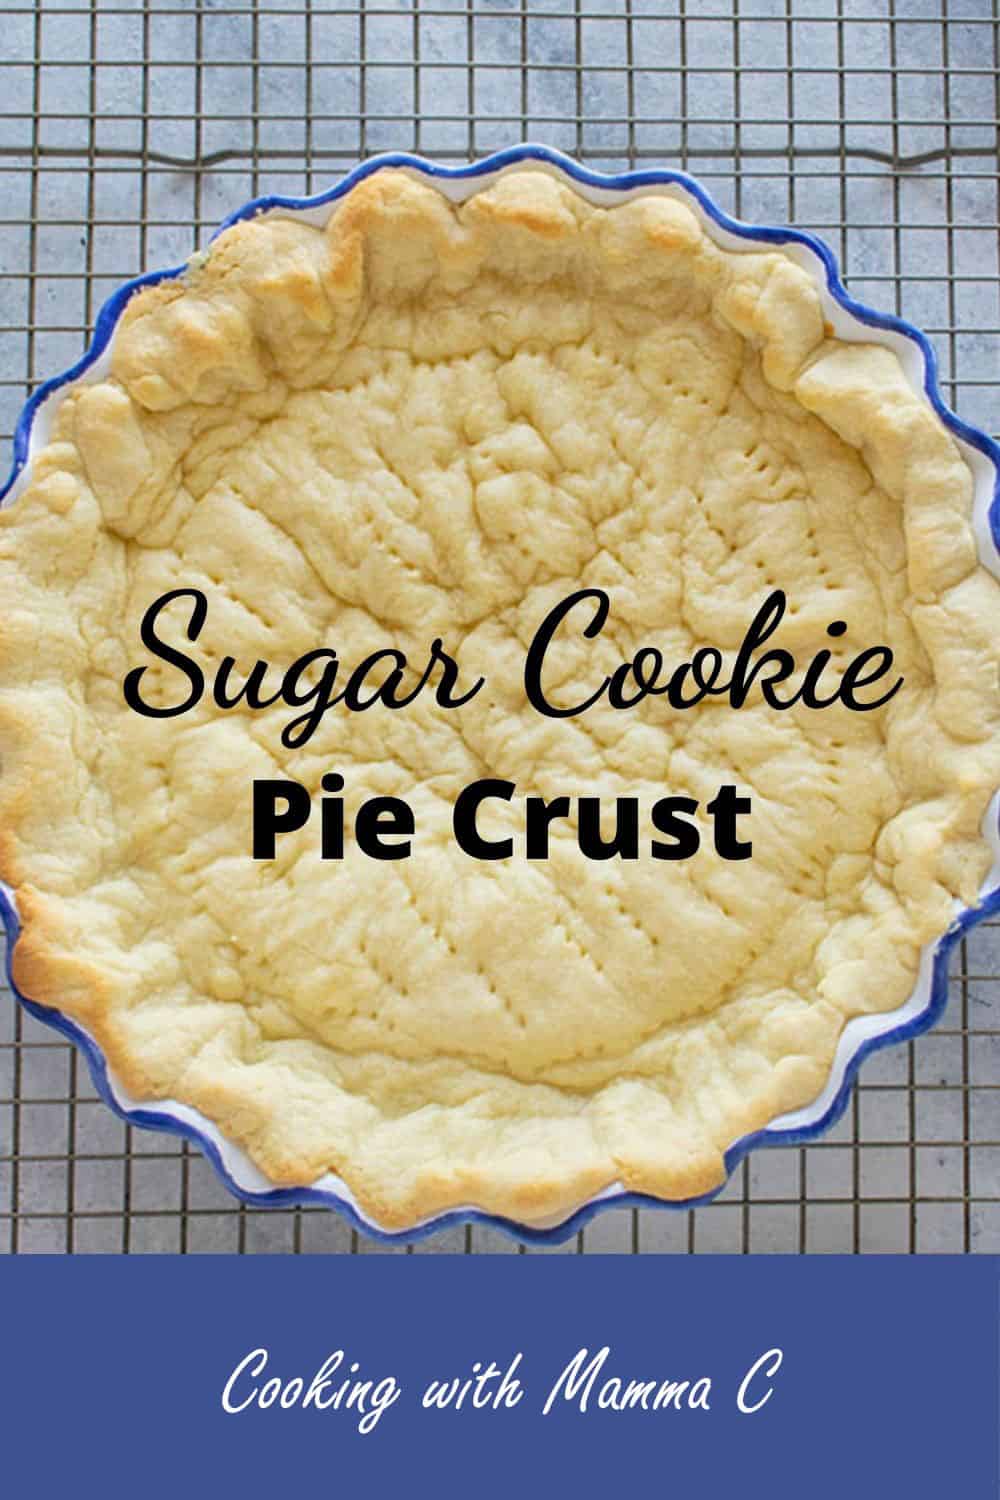 Sugar Cookie Pie Crust - Cooking with Mamma C